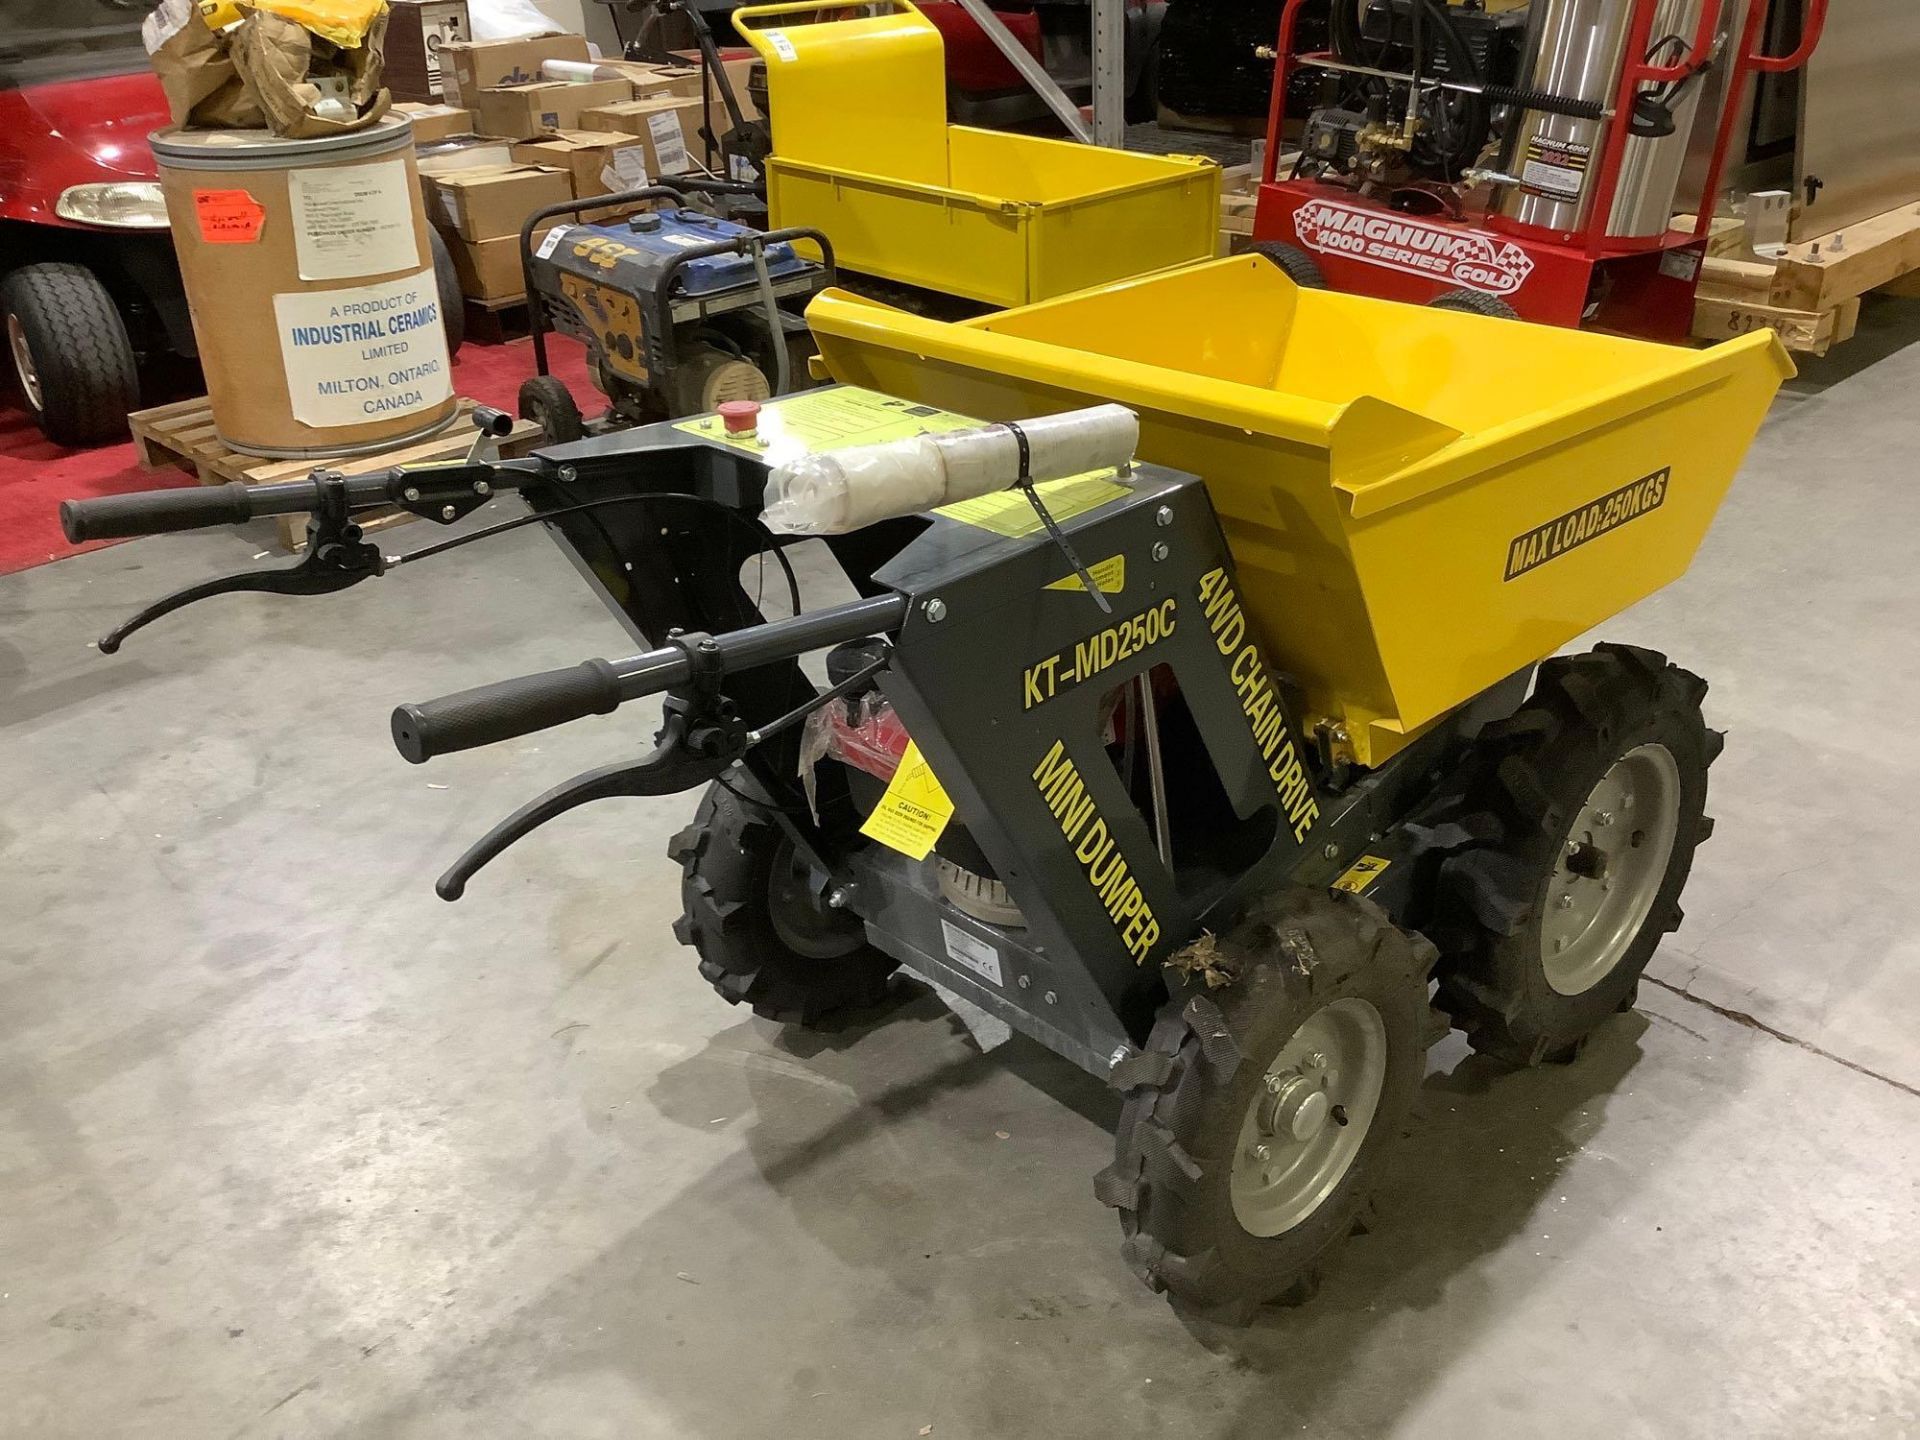 UNUSED 4WD CHAIN DRIVE MINI DUMPER MODEL KT-MD250C WITH LONCIN 196cc MOTOR, GAS POWERED, APPROX ENGI - Image 9 of 10